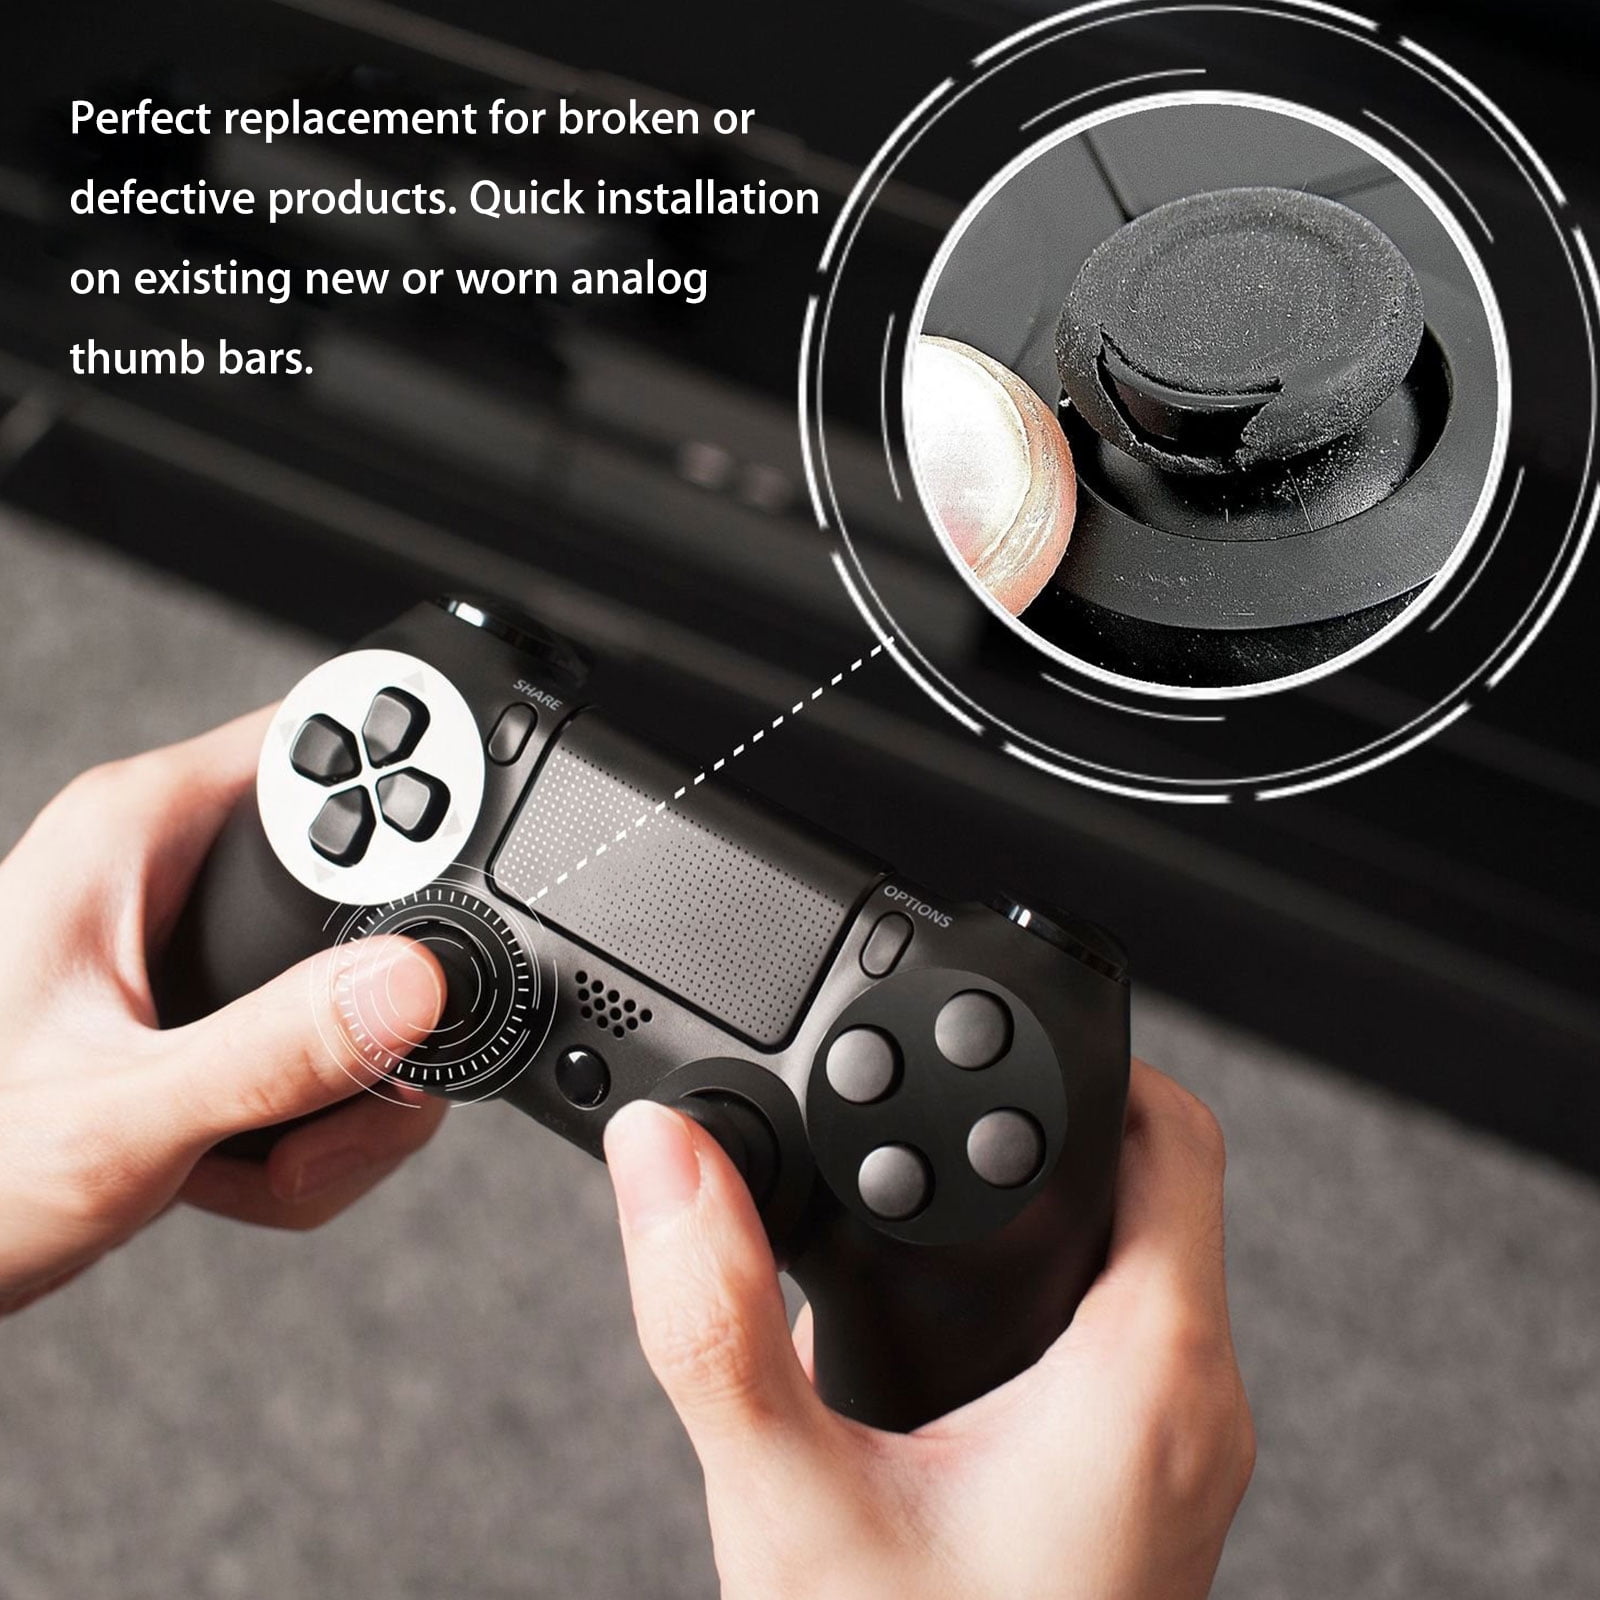 8 grips Controller Thumb Grips Compatible with Xbox One and PS3 PS4 Xbox 360 Wii Controllers Silicone Precision Raised Antislip Rubber Analog Stick Grips 